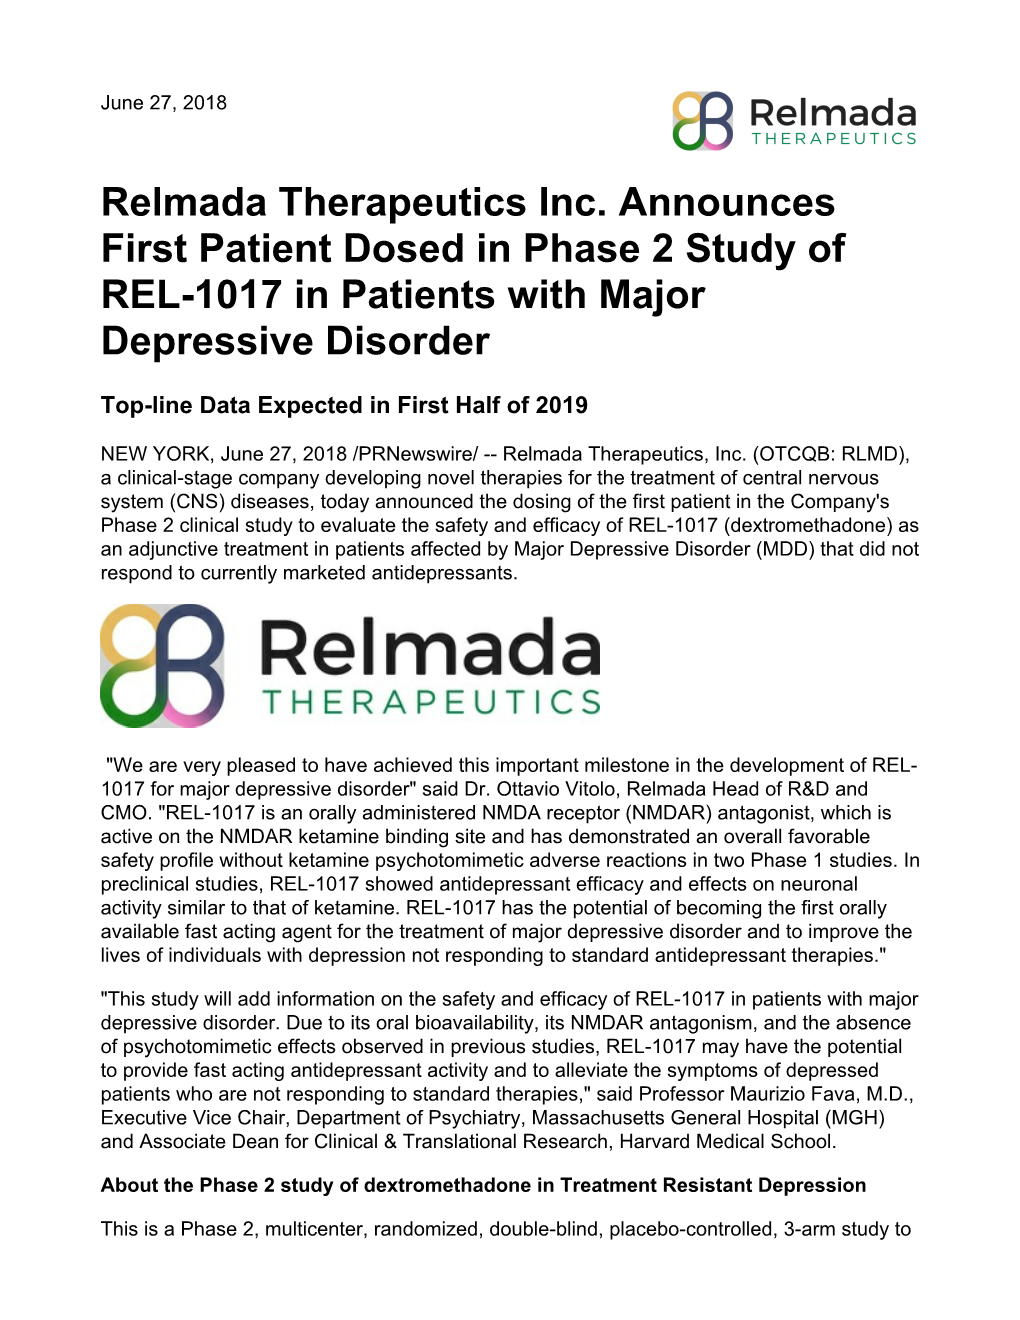 Relmada Therapeutics Inc. Announces First Patient Dosed in Phase 2 Study of REL-1017 in Patients with Major Depressive Disorder